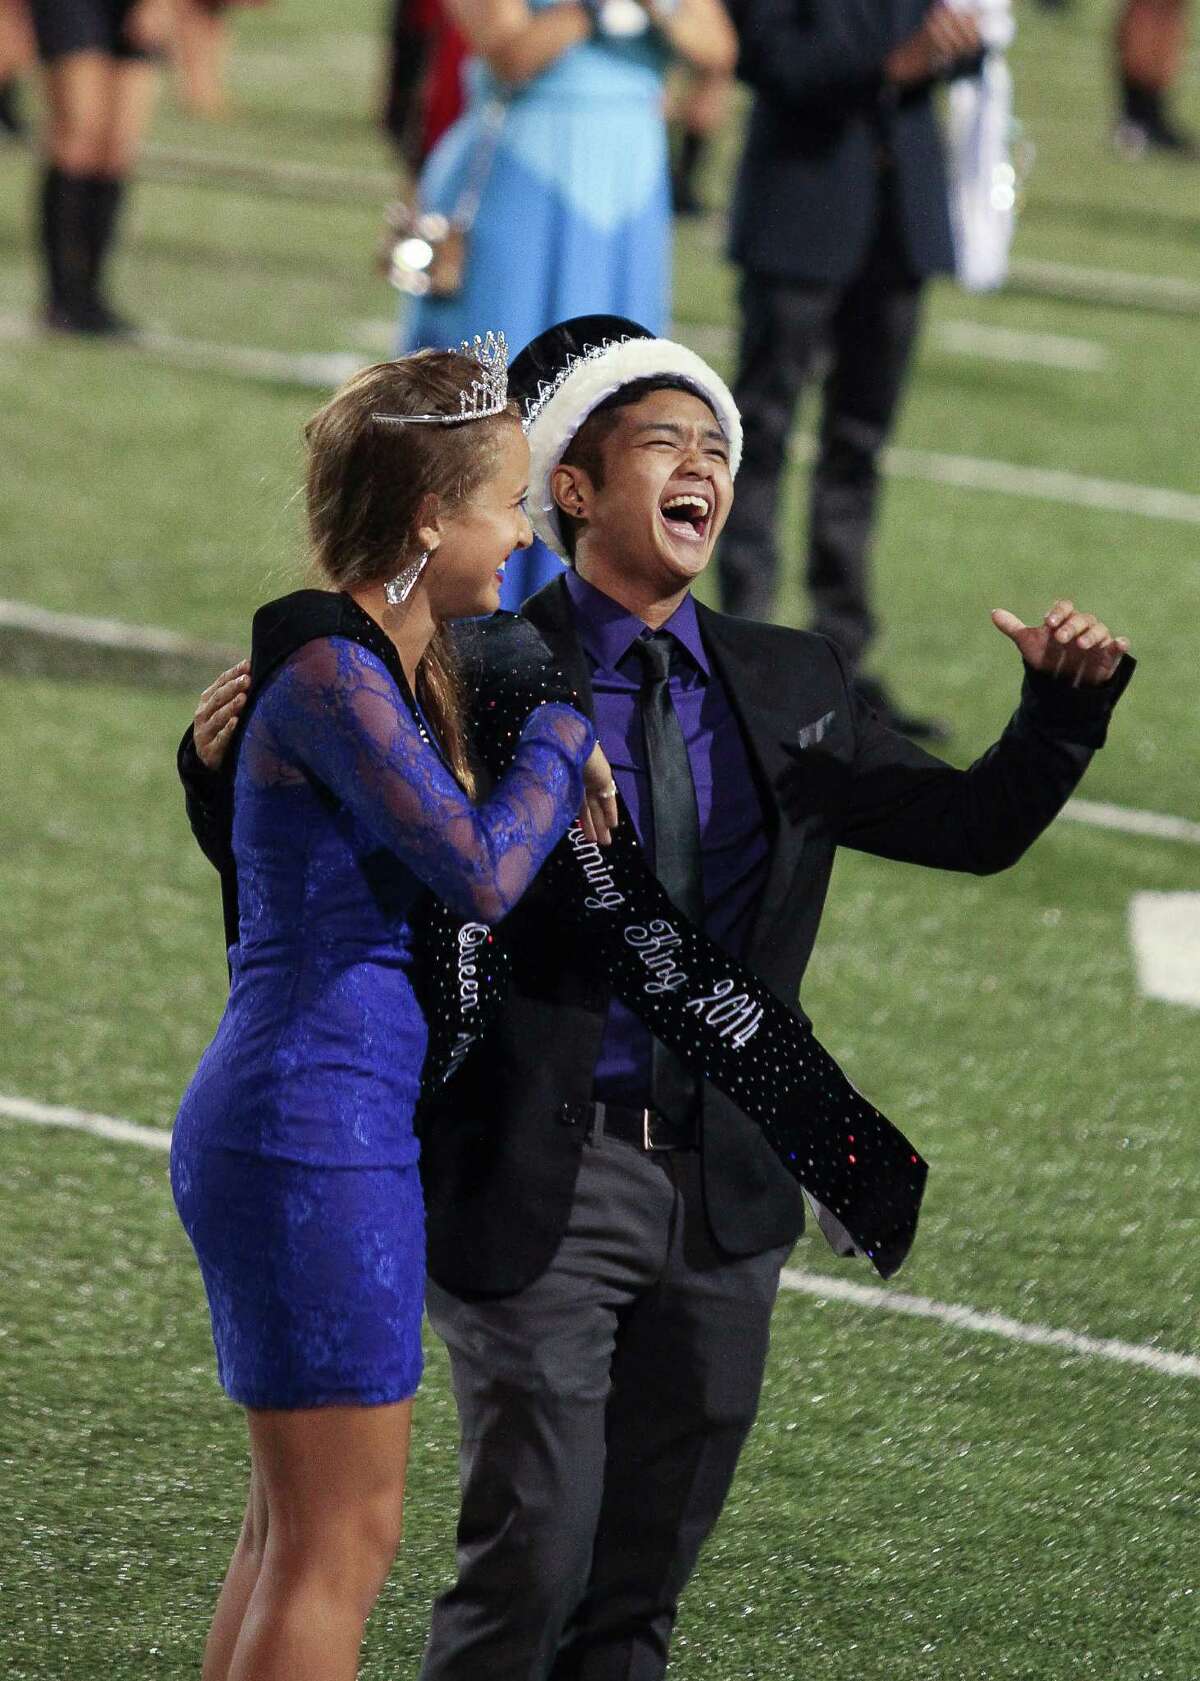 Female-male transgender student Mel Gonzales said he was stunned when his name was called to be Homecoming King for Austin High School in Sugar Land. Fellow student, Mercedes Mackay, was named homecoming queen.